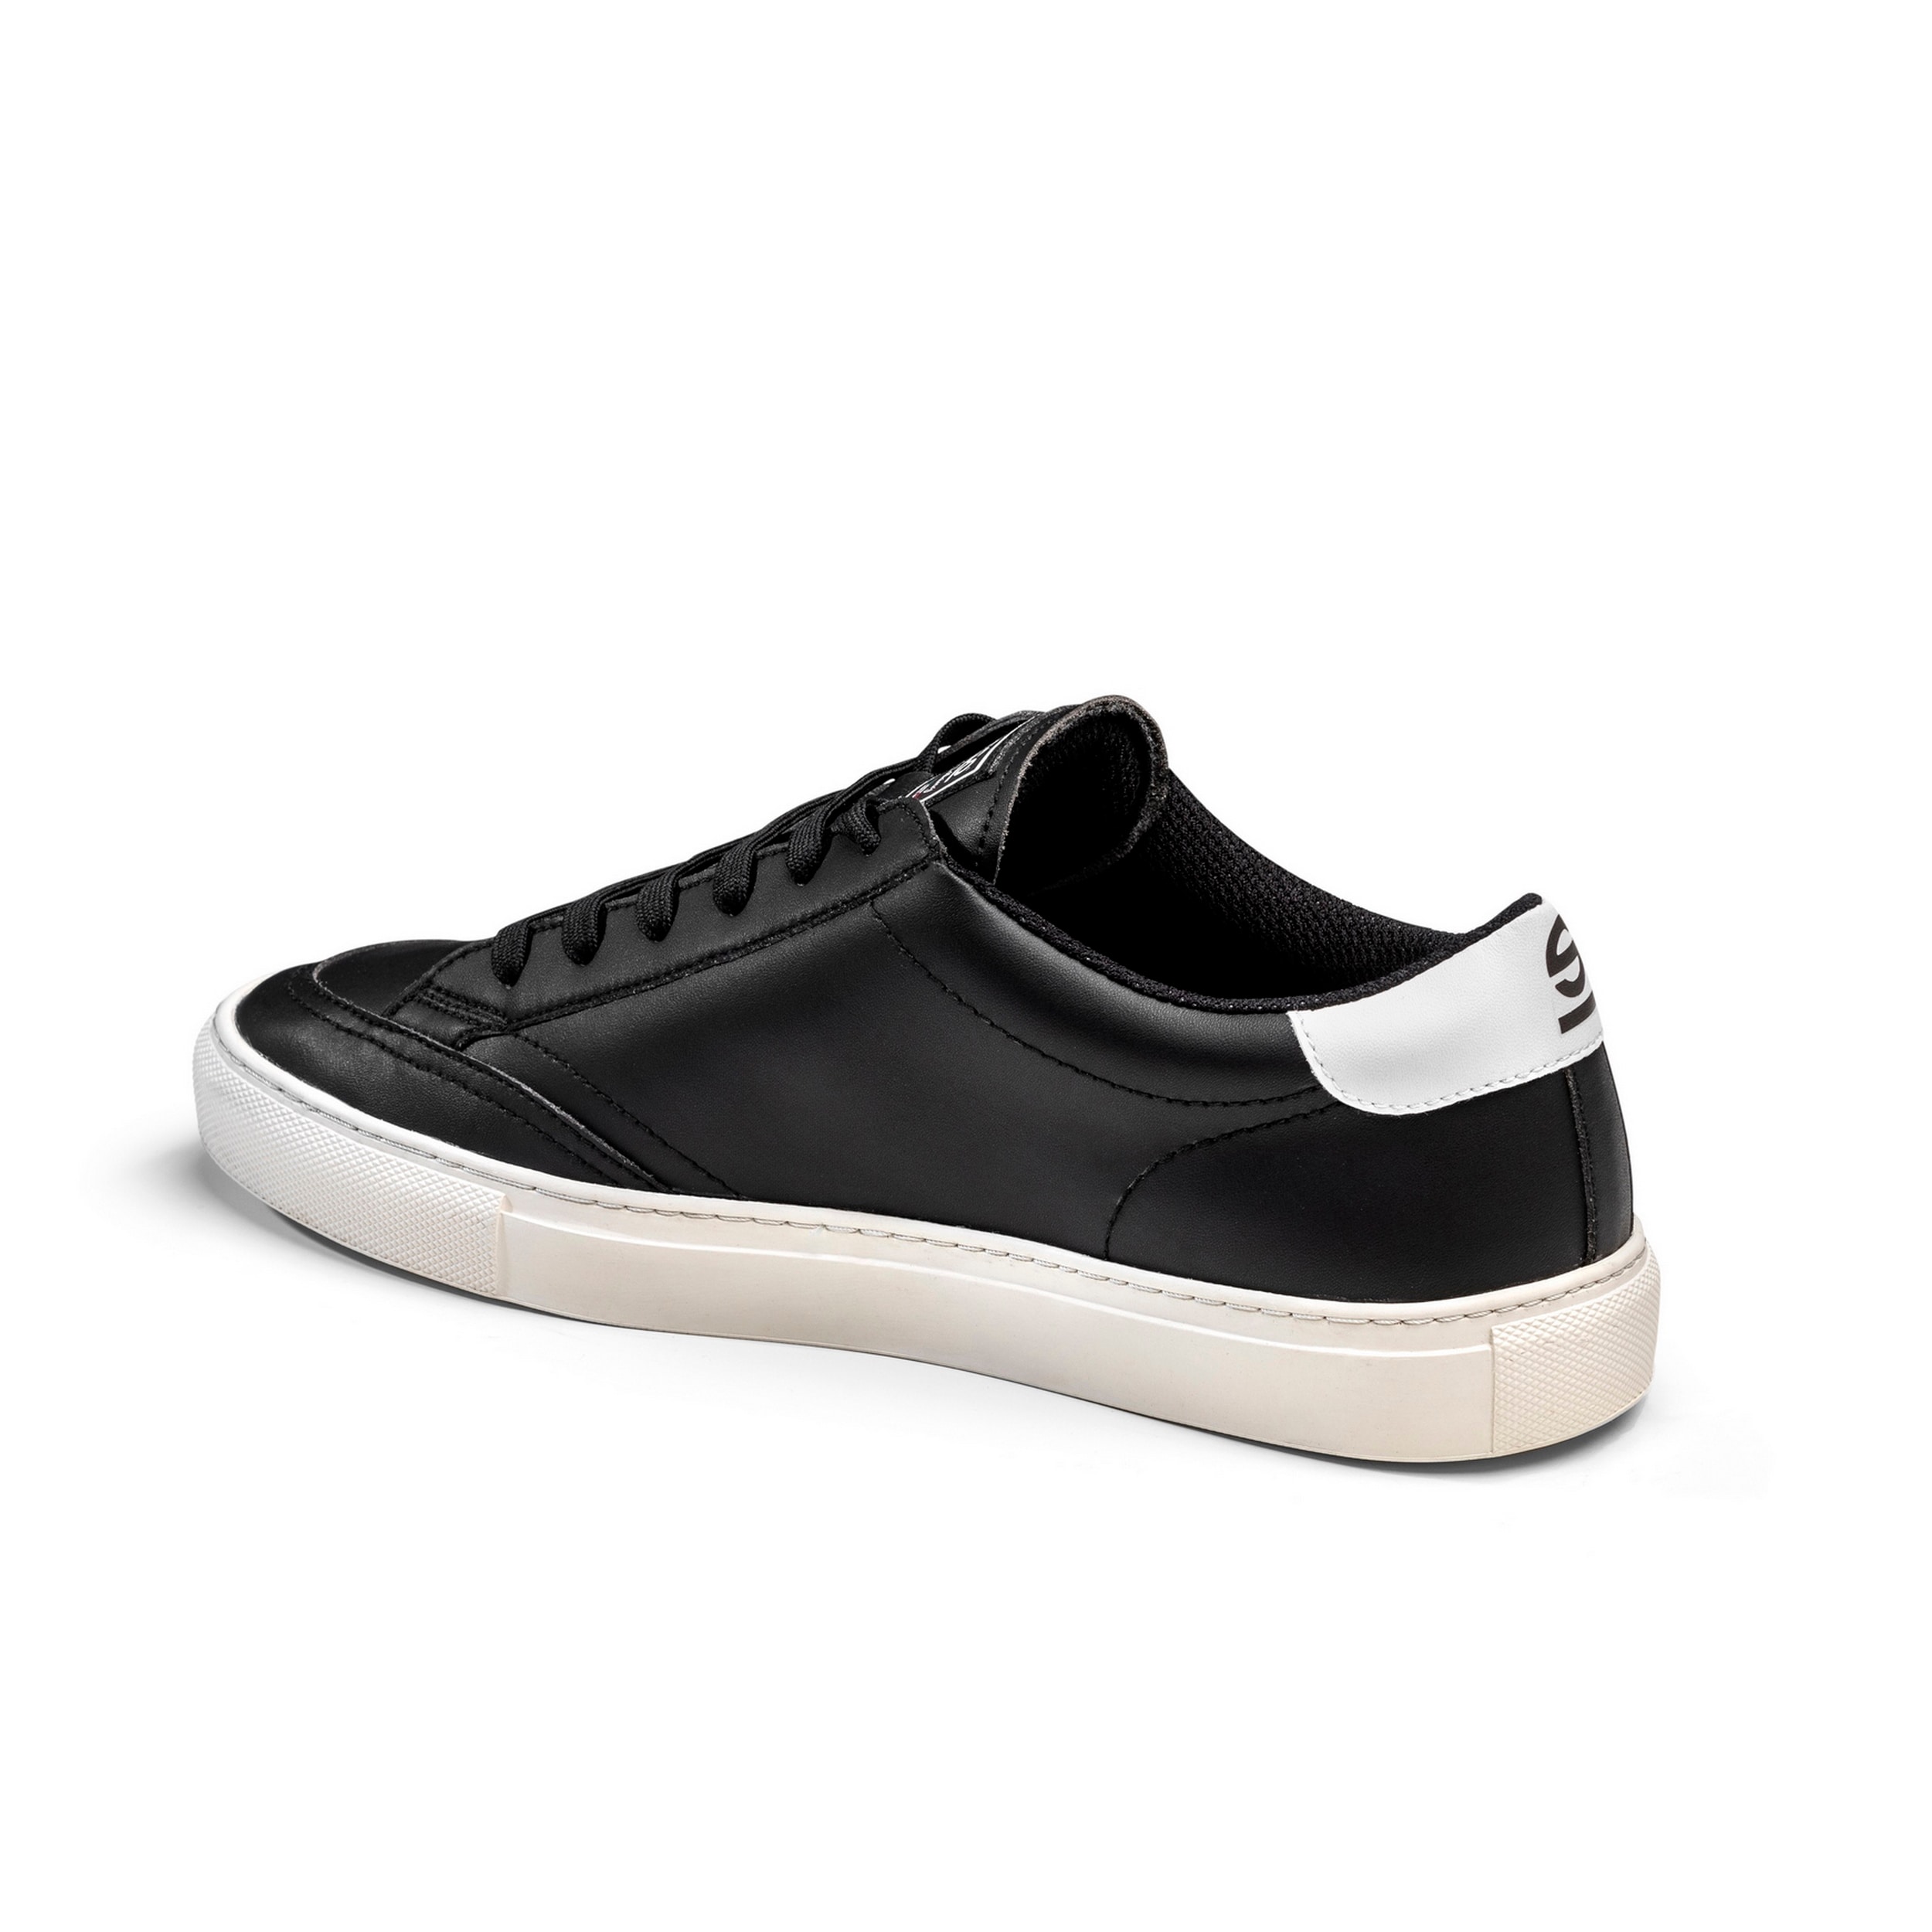 Shoes Sparco S-Time Black/White